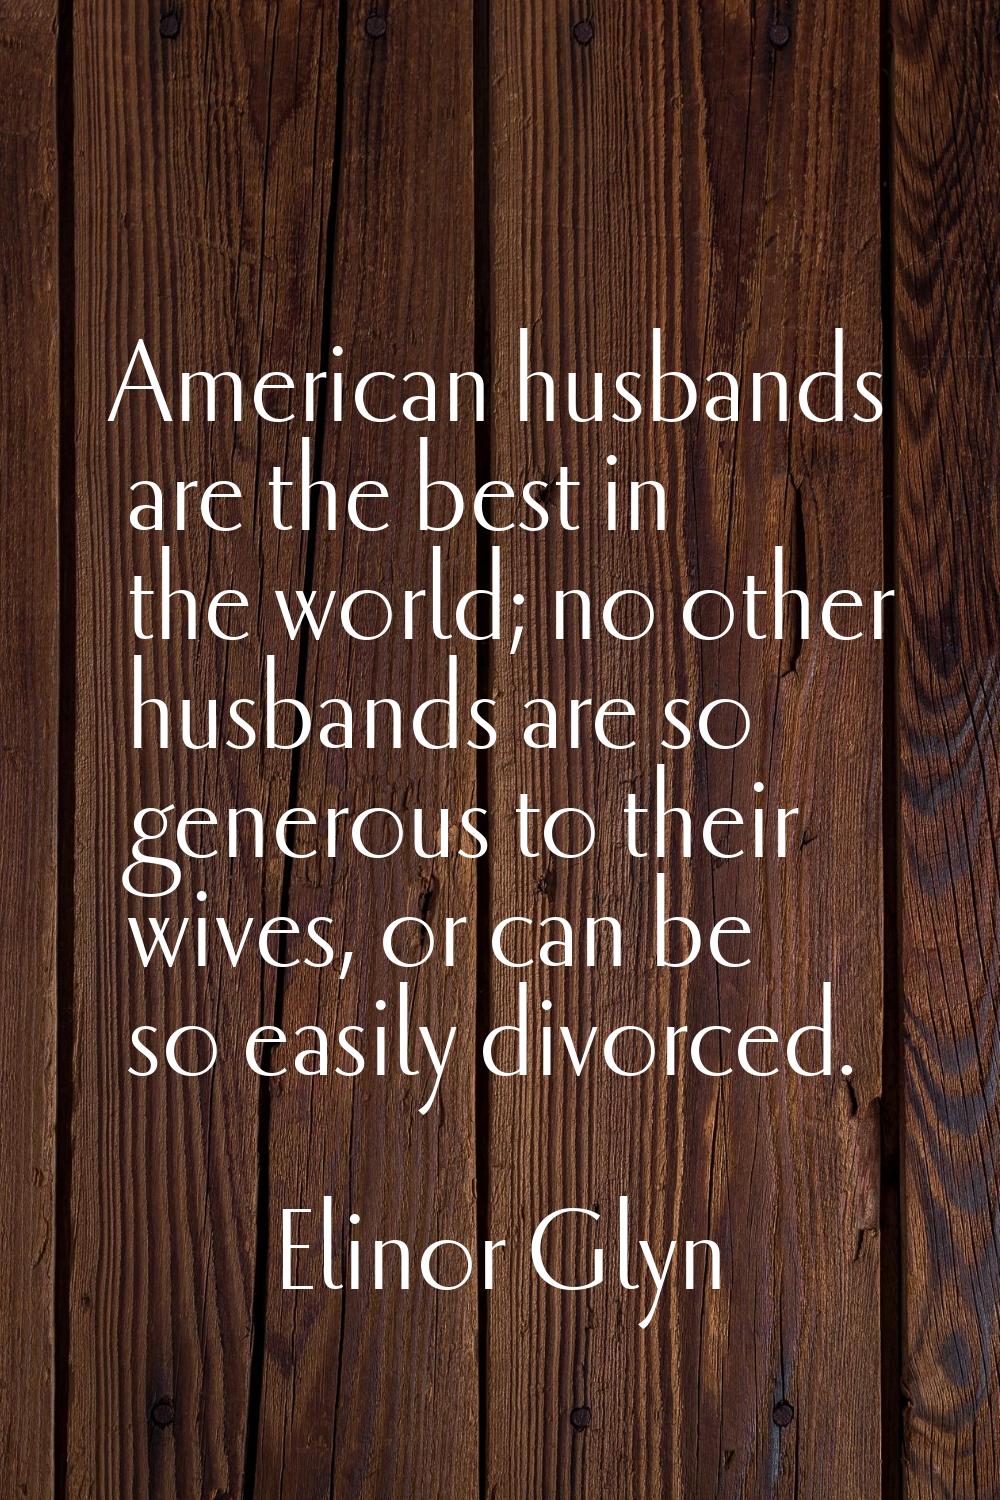 American husbands are the best in the world; no other husbands are so generous to their wives, or c